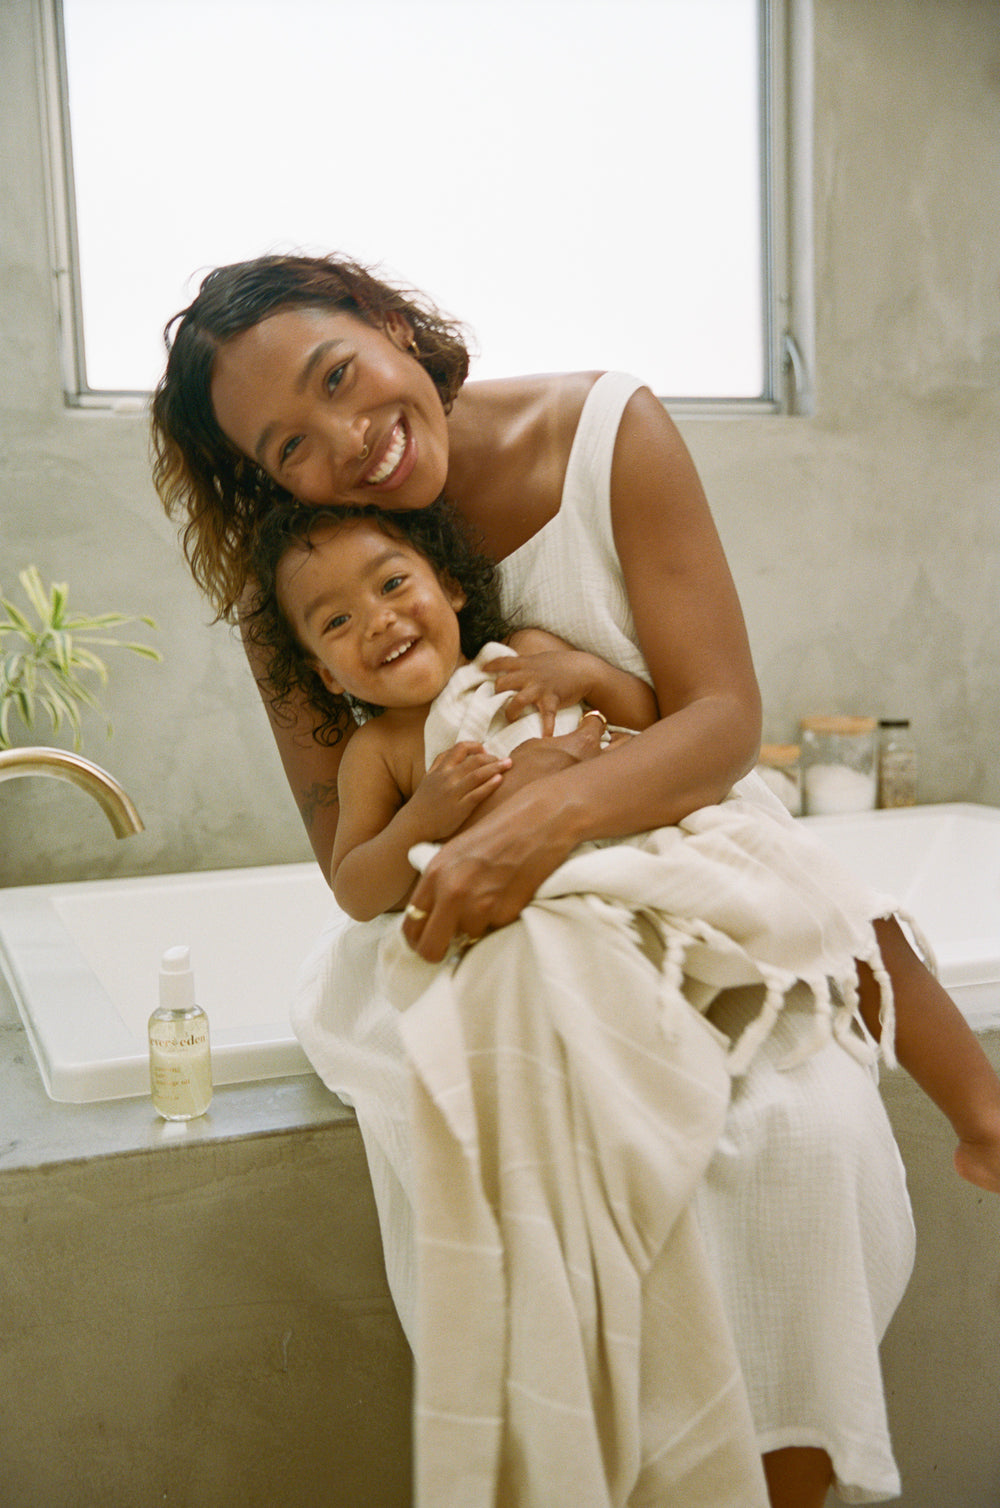 Clean Beauty Tips for You and Your Baby, According to a Dermatologist